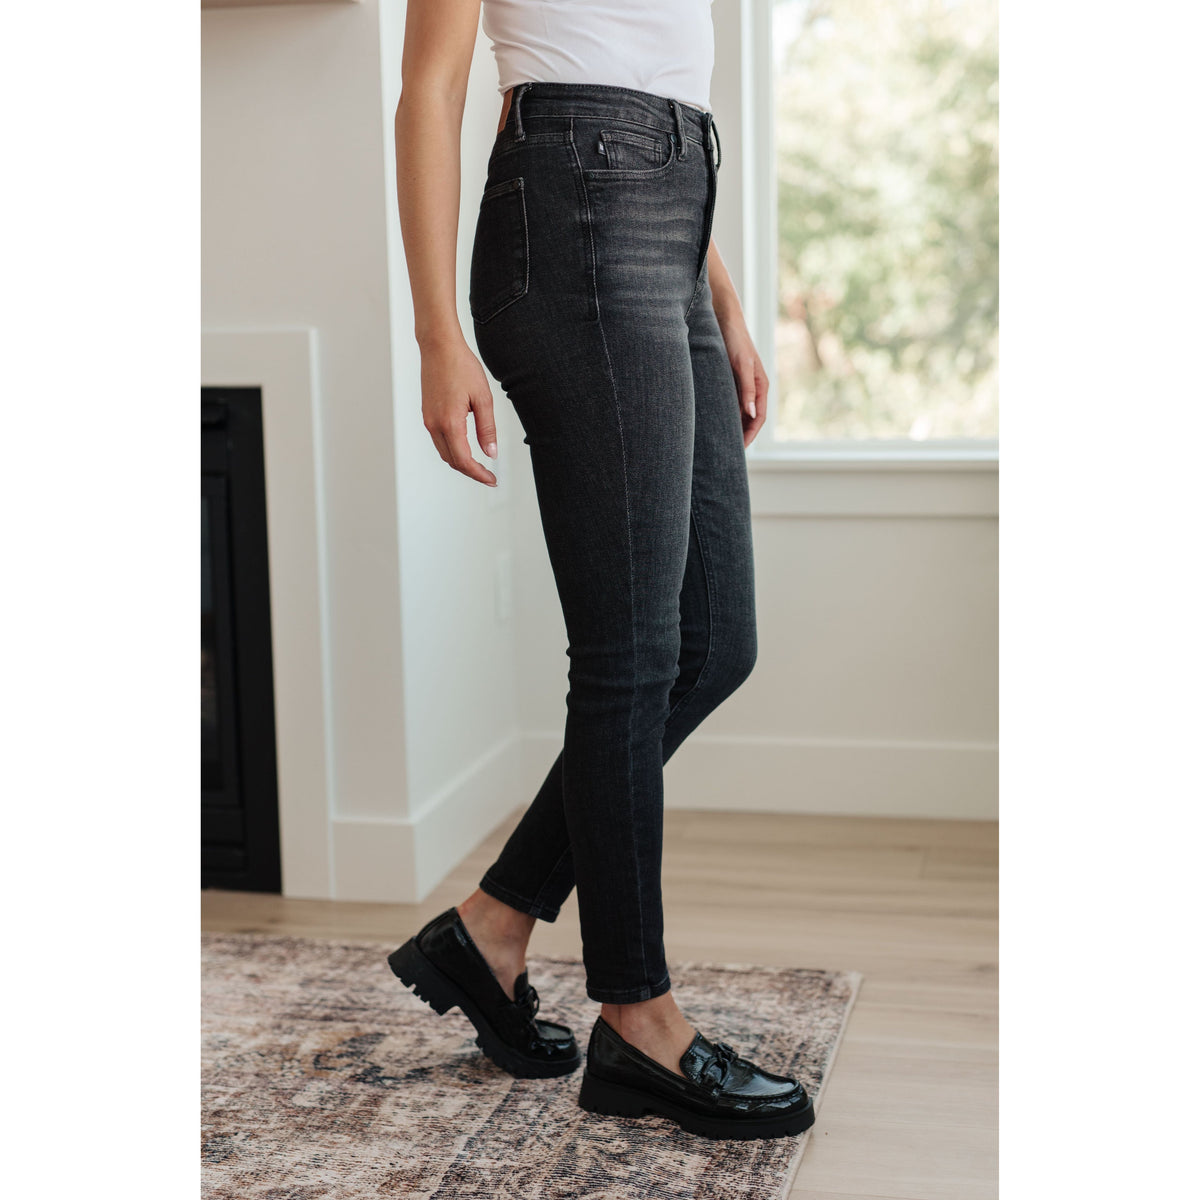 Judy Blue | Octavia High Rise Control Top Skinny Jeans in Washed Black